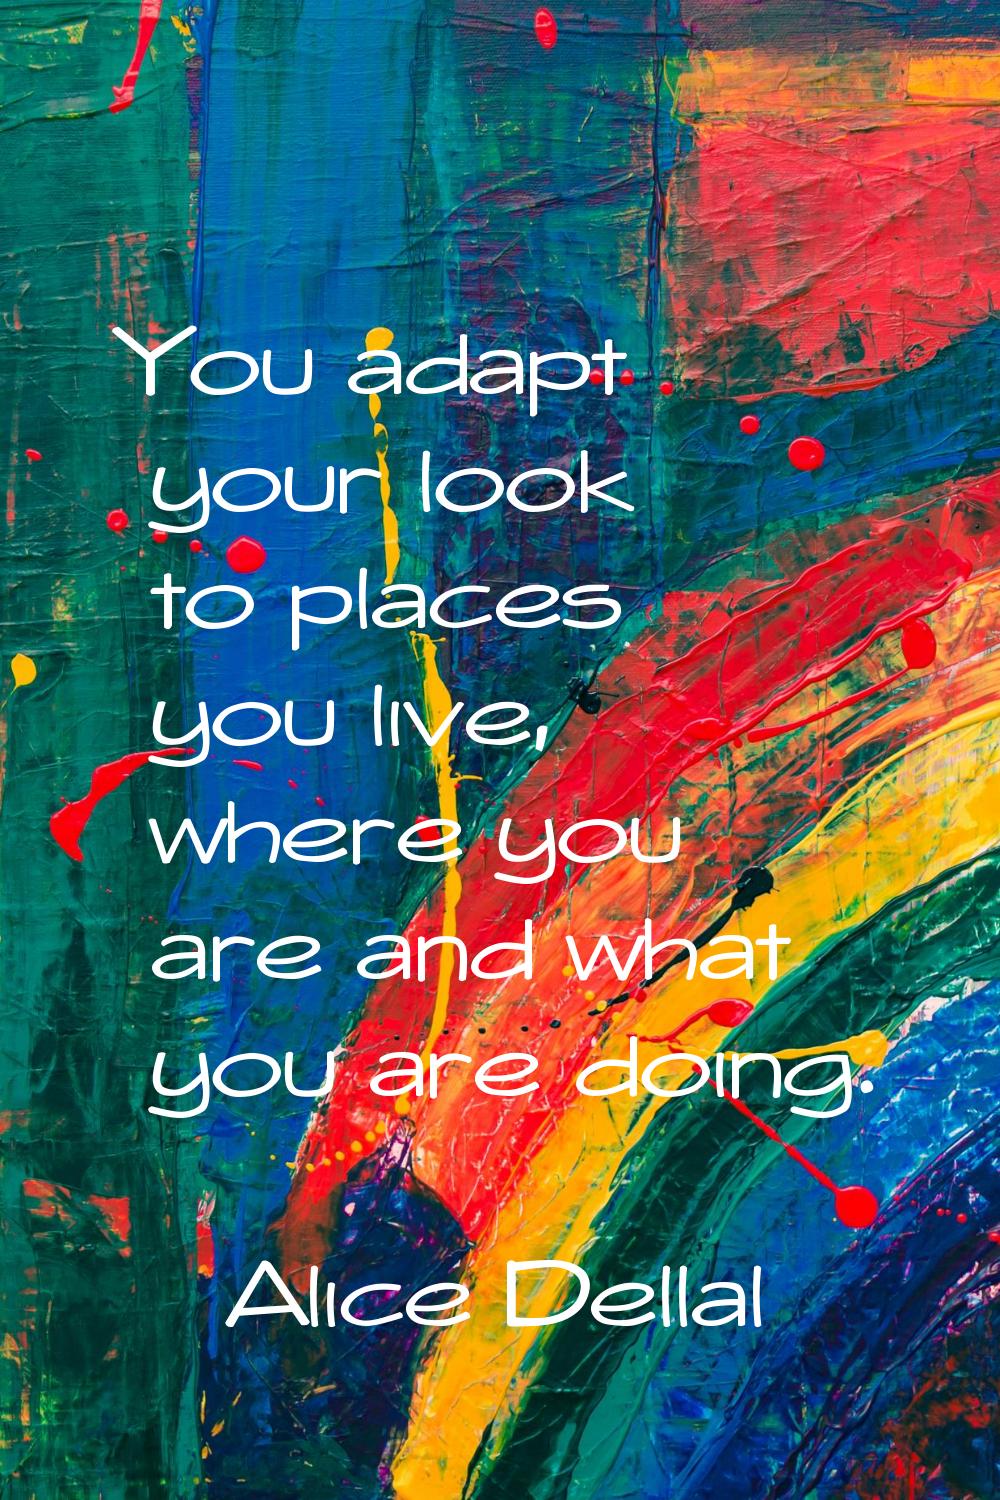 You adapt your look to places you live, where you are and what you are doing.